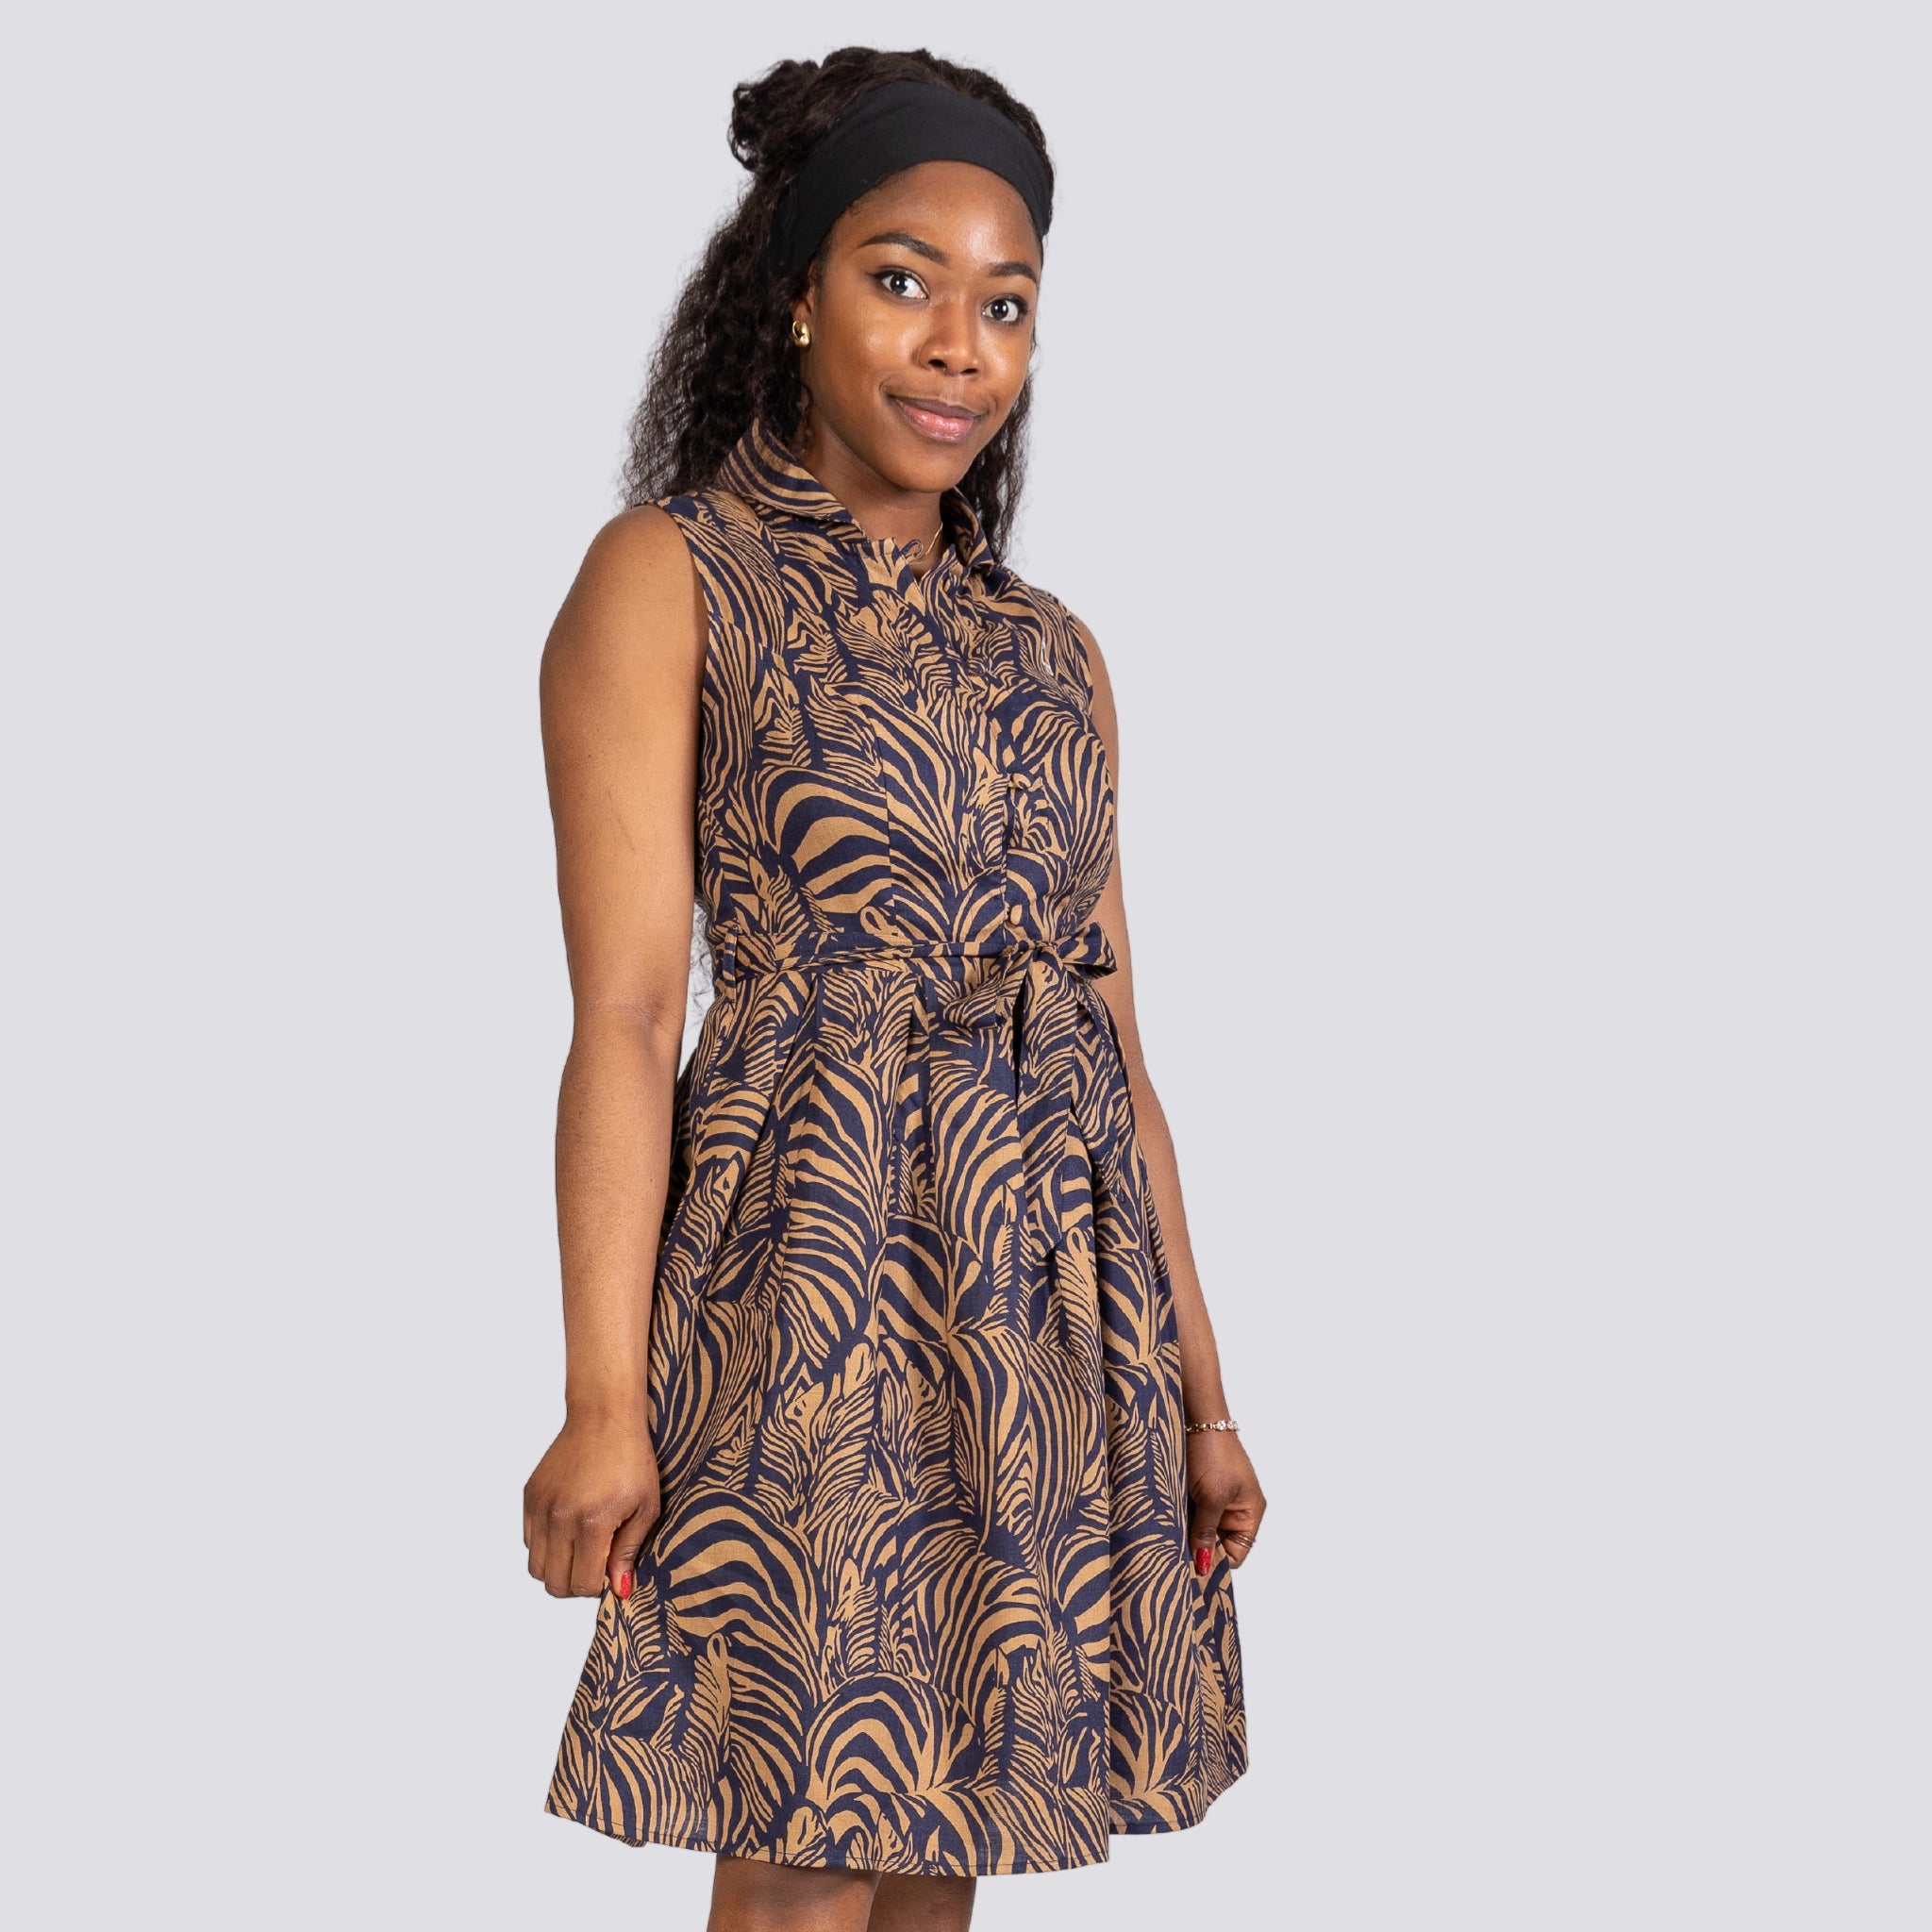 A young woman in a sleeveless navy blue patterned dress stands confidently, looking to the side, isolated on a light gray background. (Product: Linen Enchantment Button-Up Midi Dress, Brand: Karee)